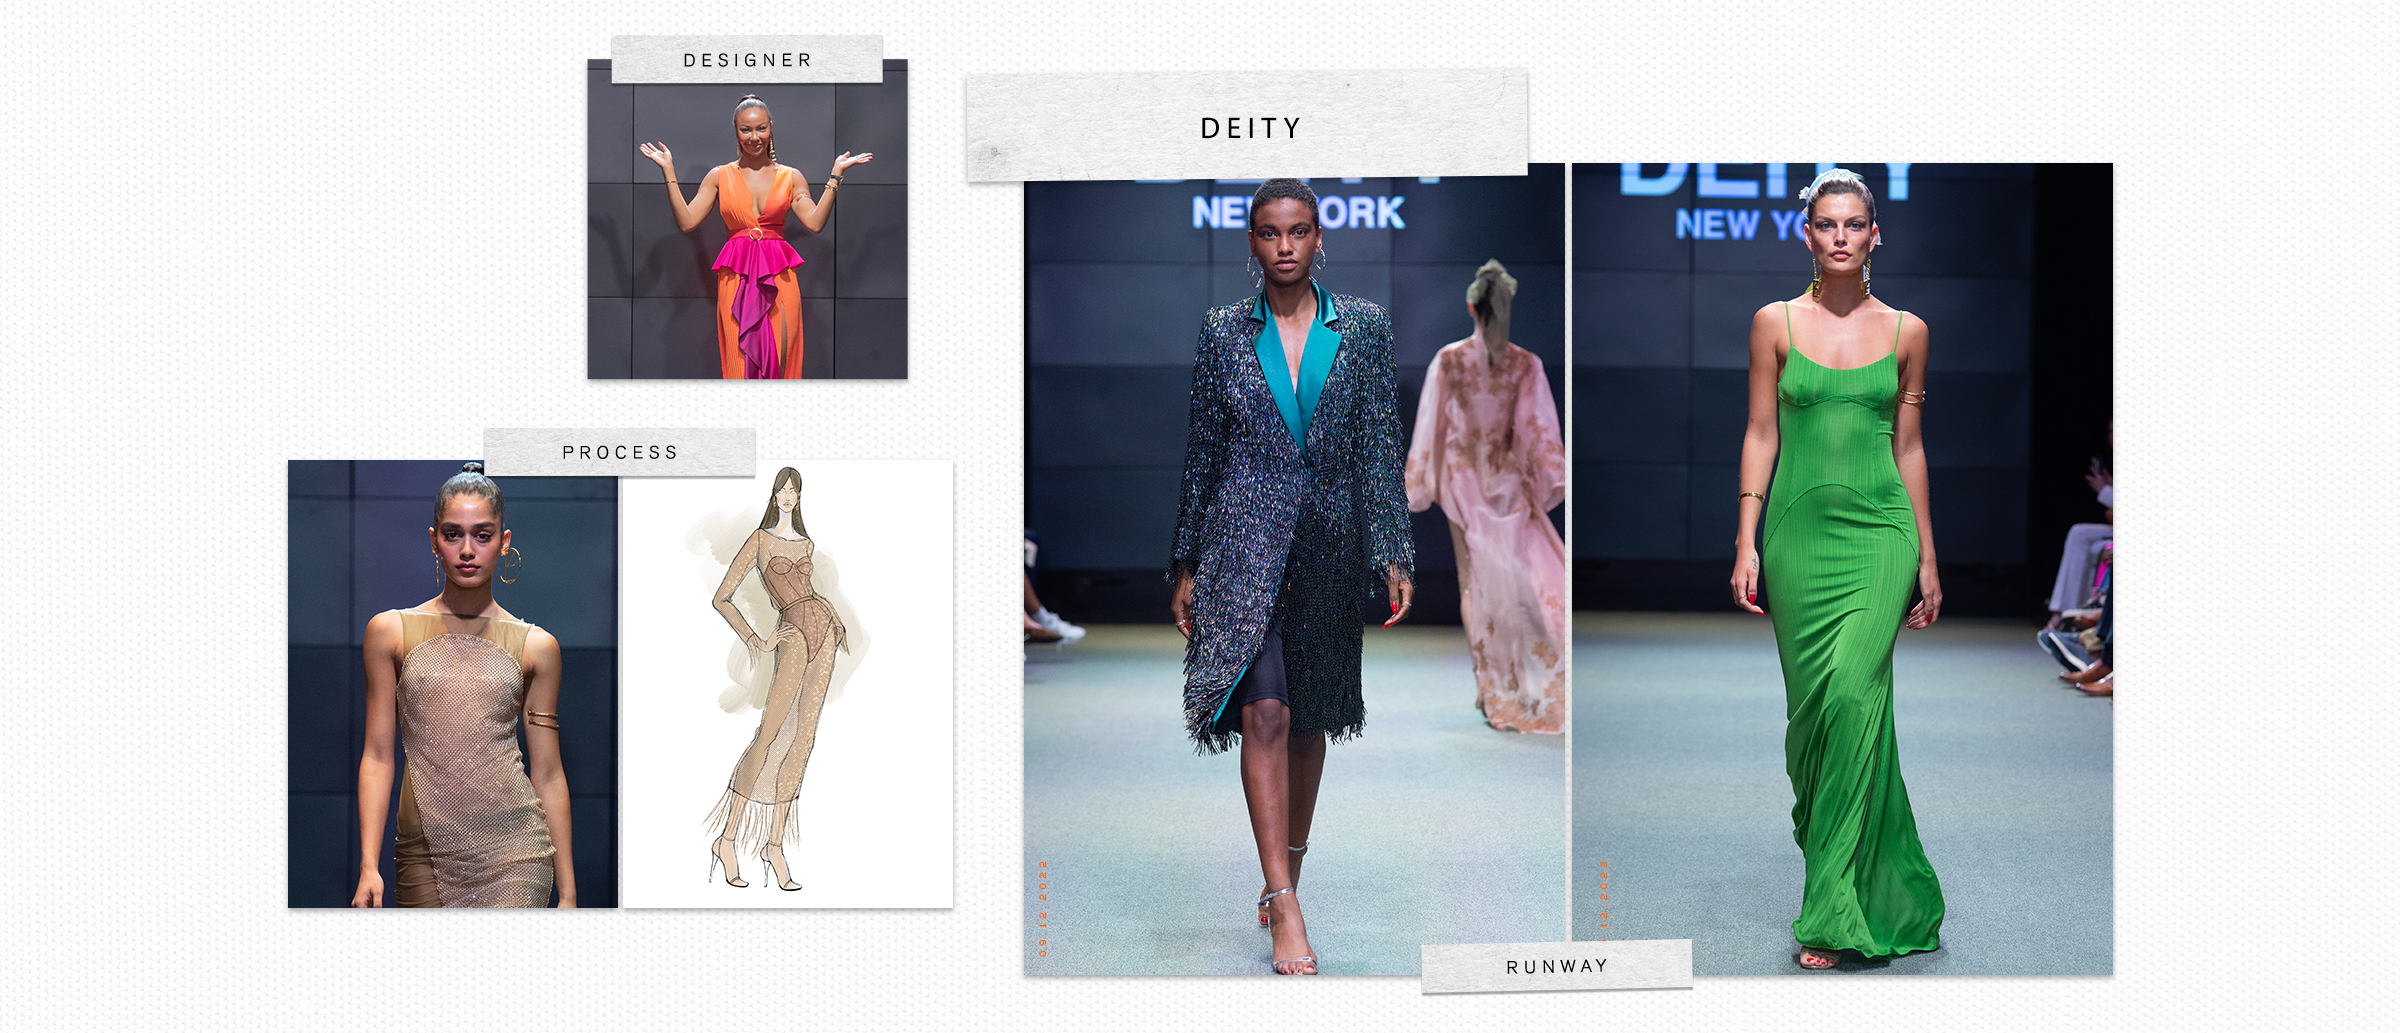 Black-owned fashion brand, Deity's spring collection